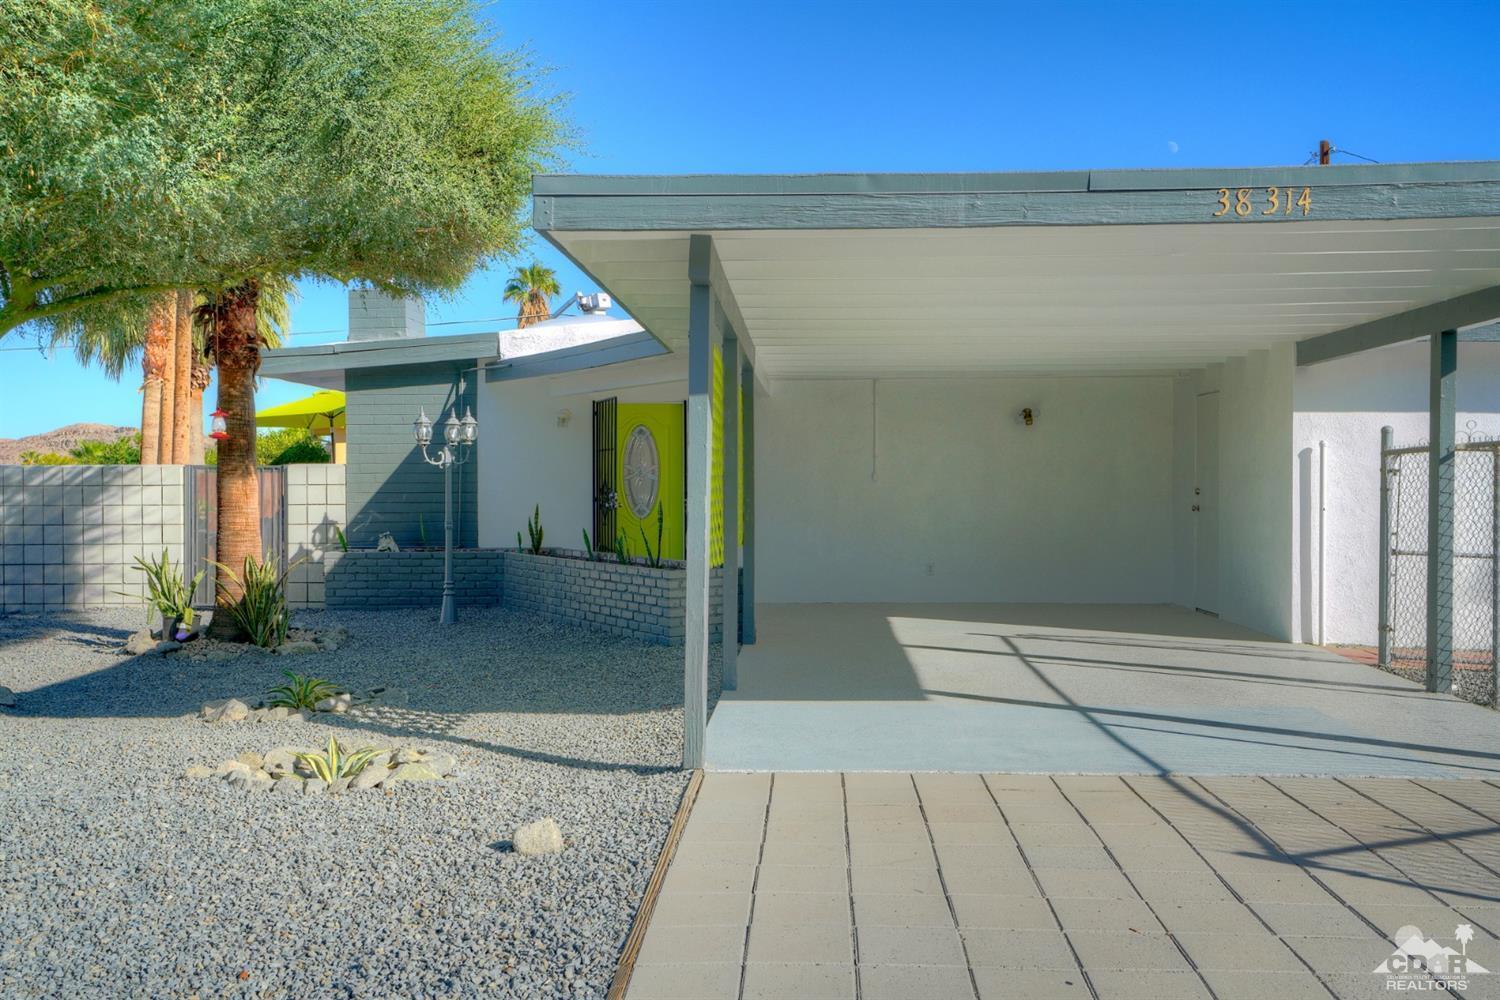 Image Number 1 for 38314 Bel Air Drive in Cathedral City